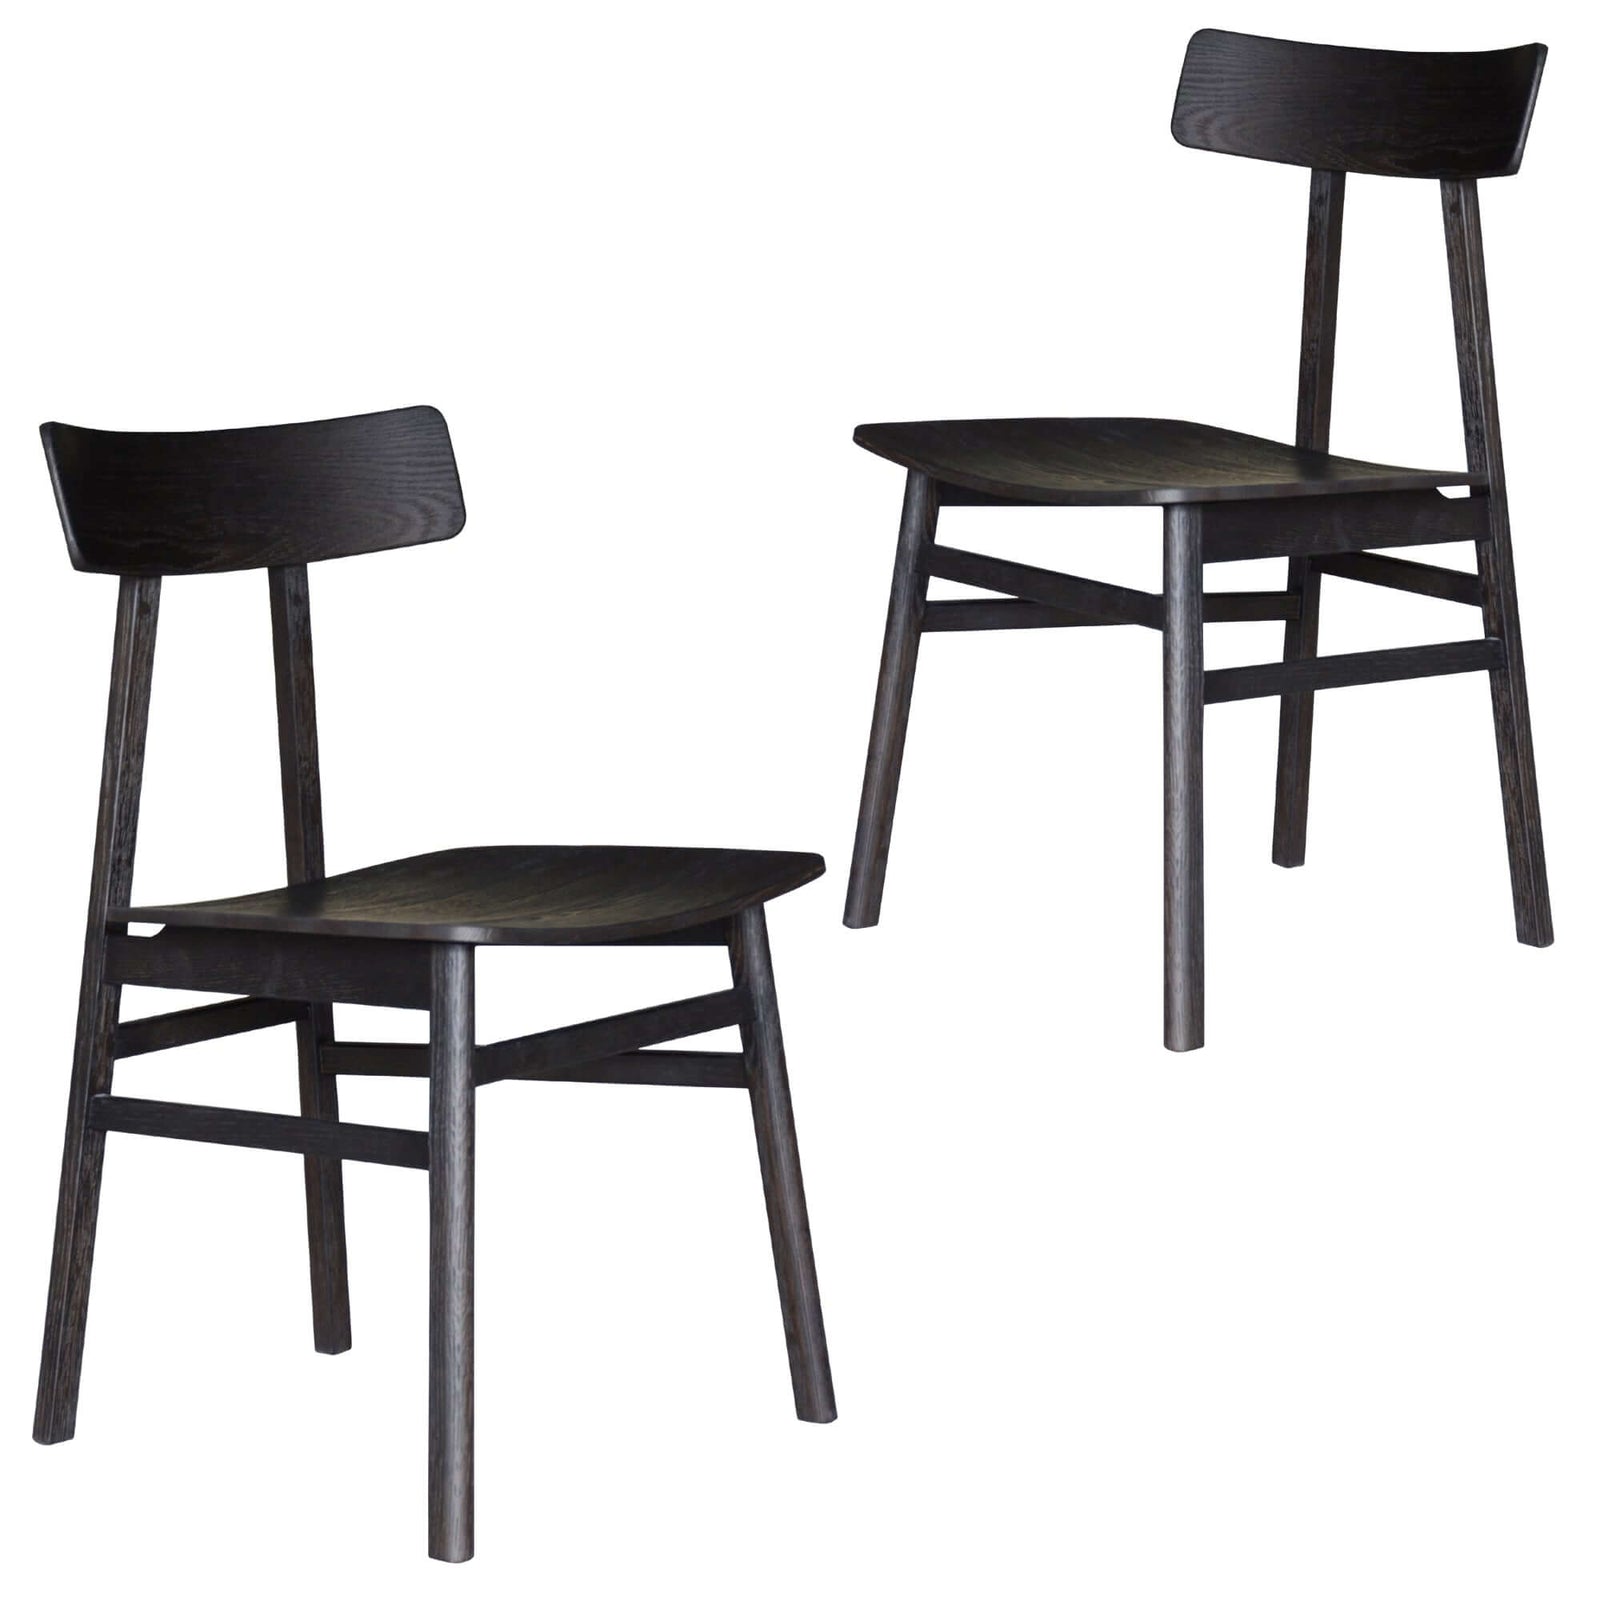 Claire Dining Chair Set of 2 Solid Oak Wood Timber Seat Furniture - Black-Upinteriors